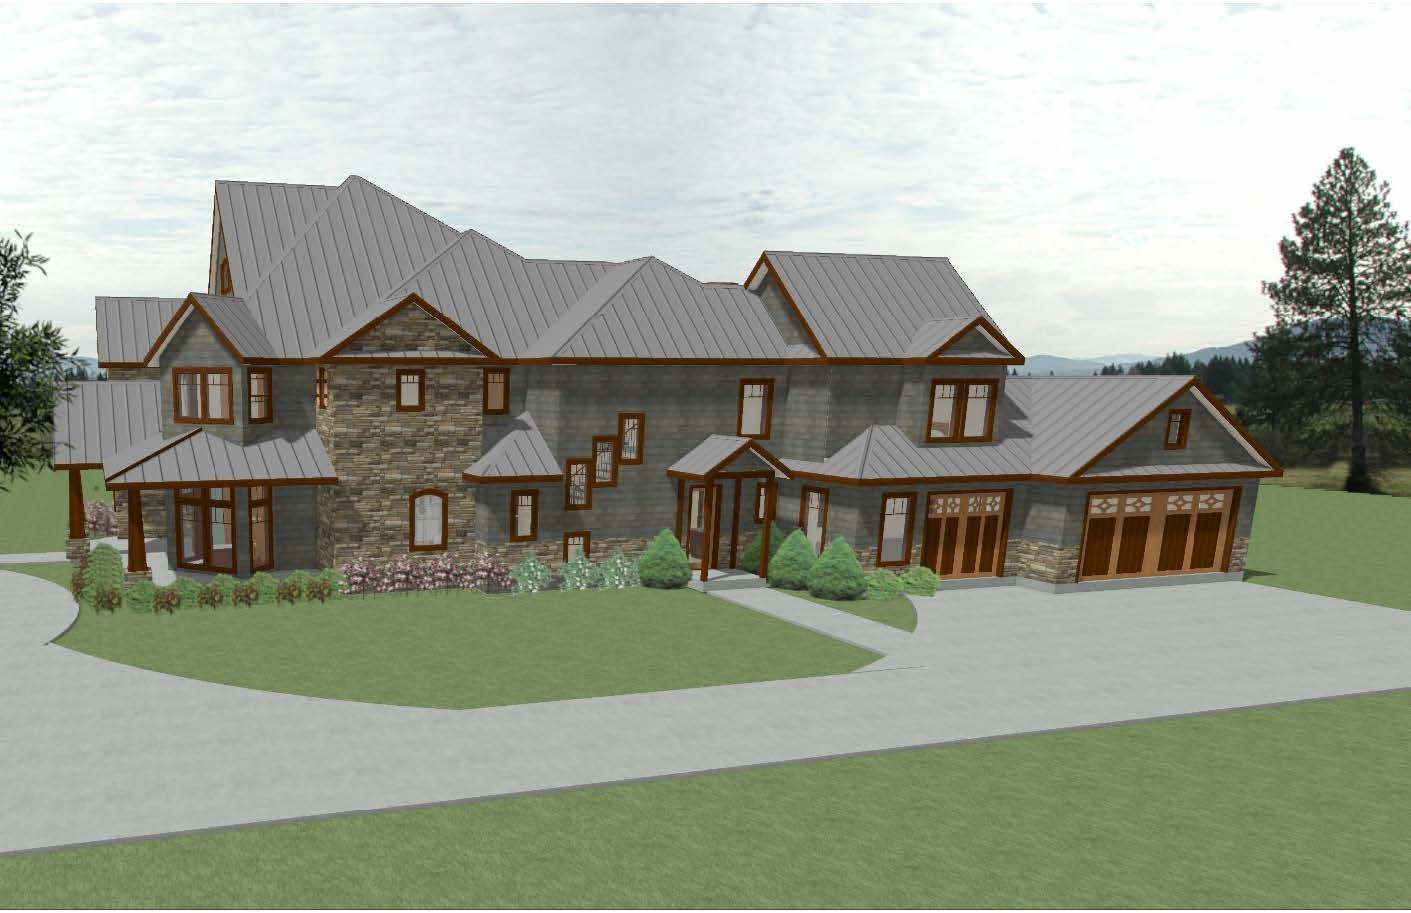 3D rendering side view of a Craftsman style mansion.